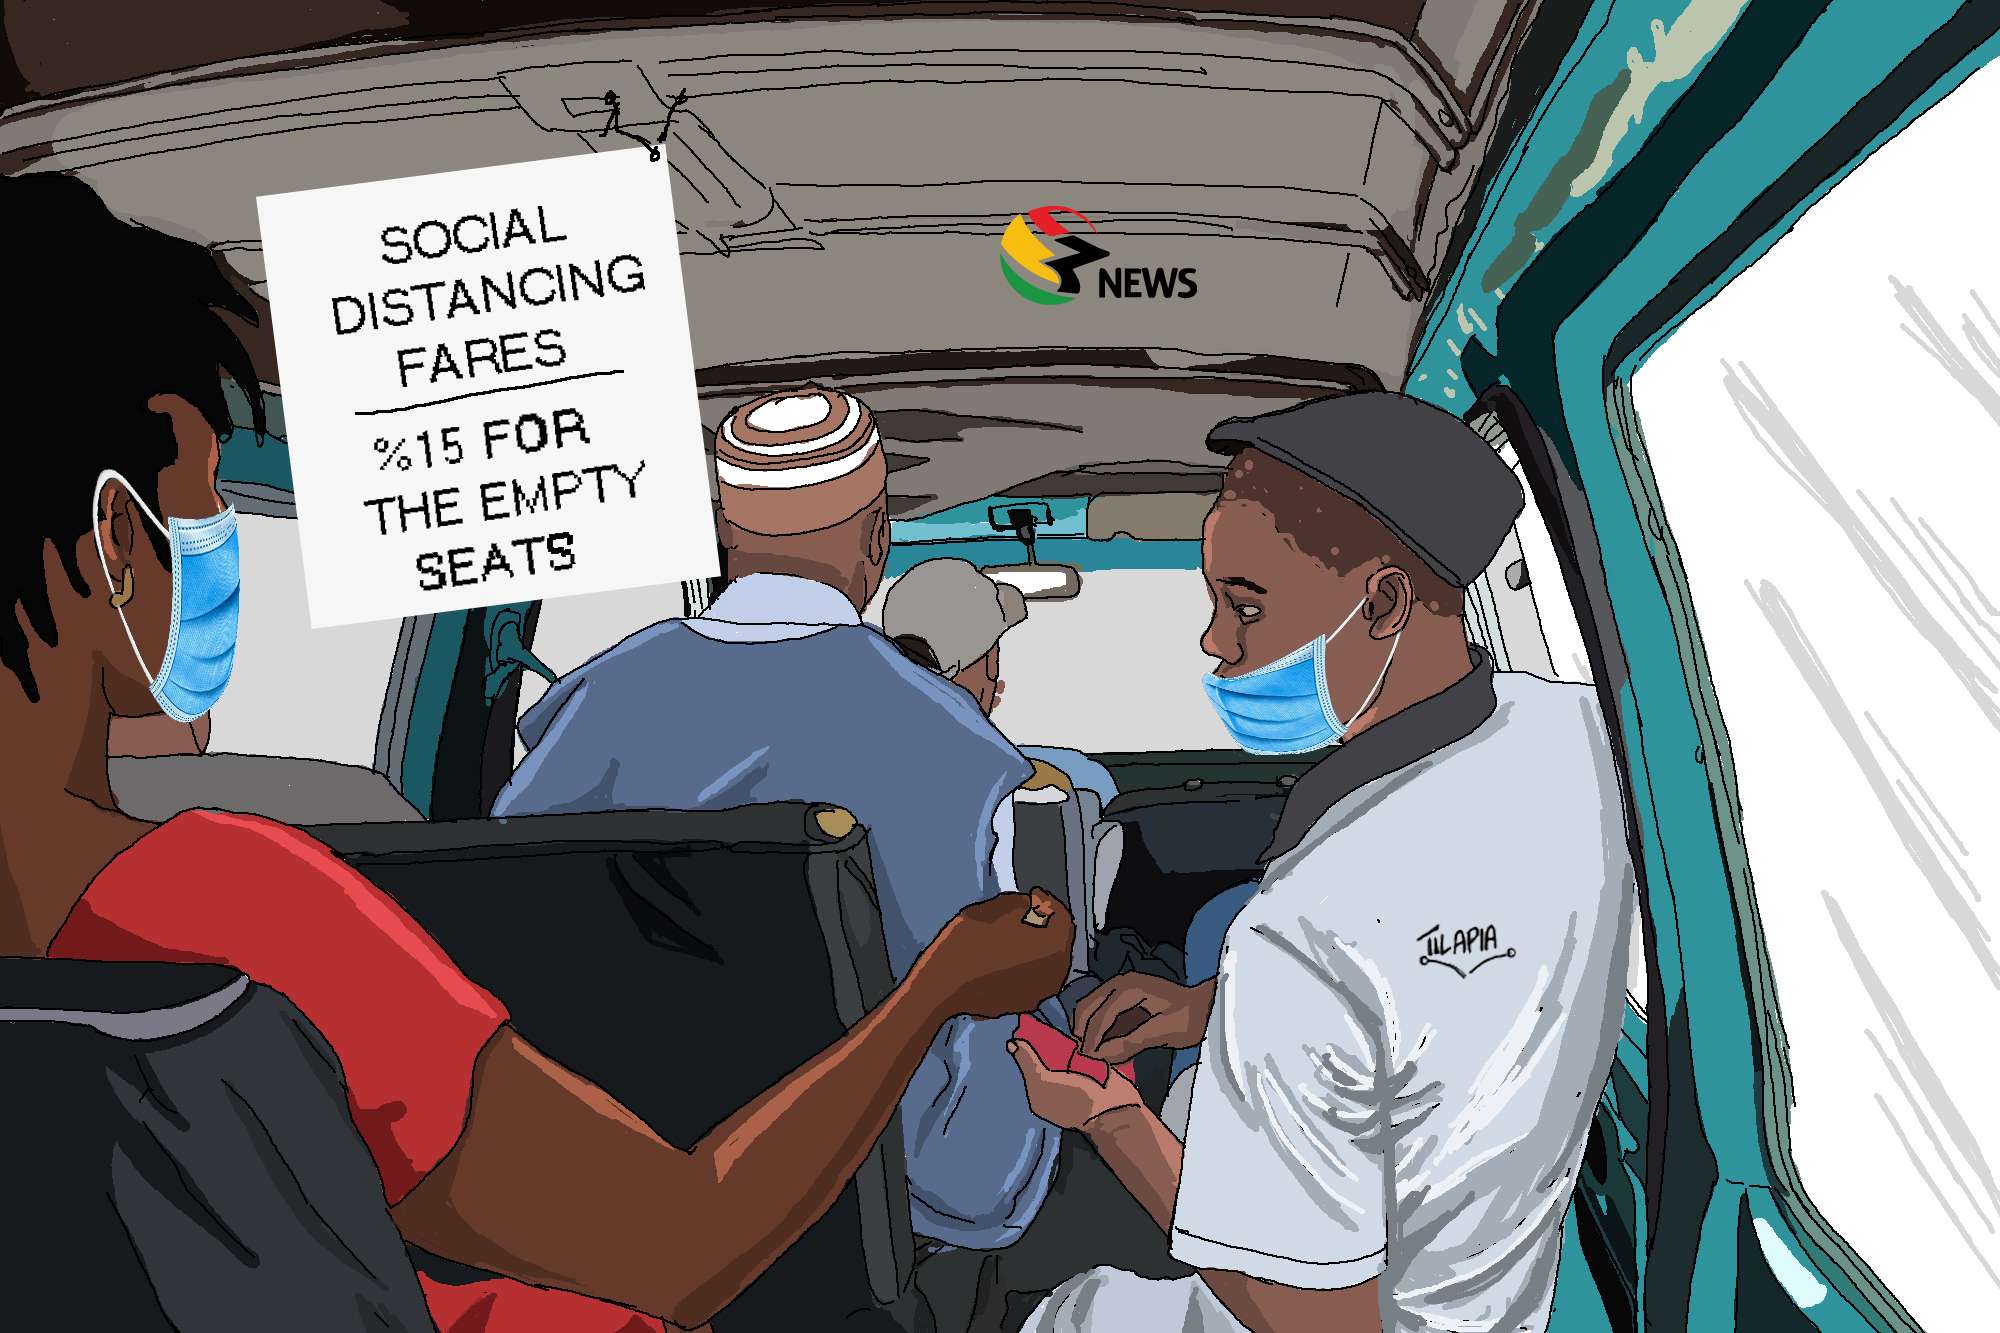 [Cartoon] 15% hike in transport fares: Paying for social distancing!